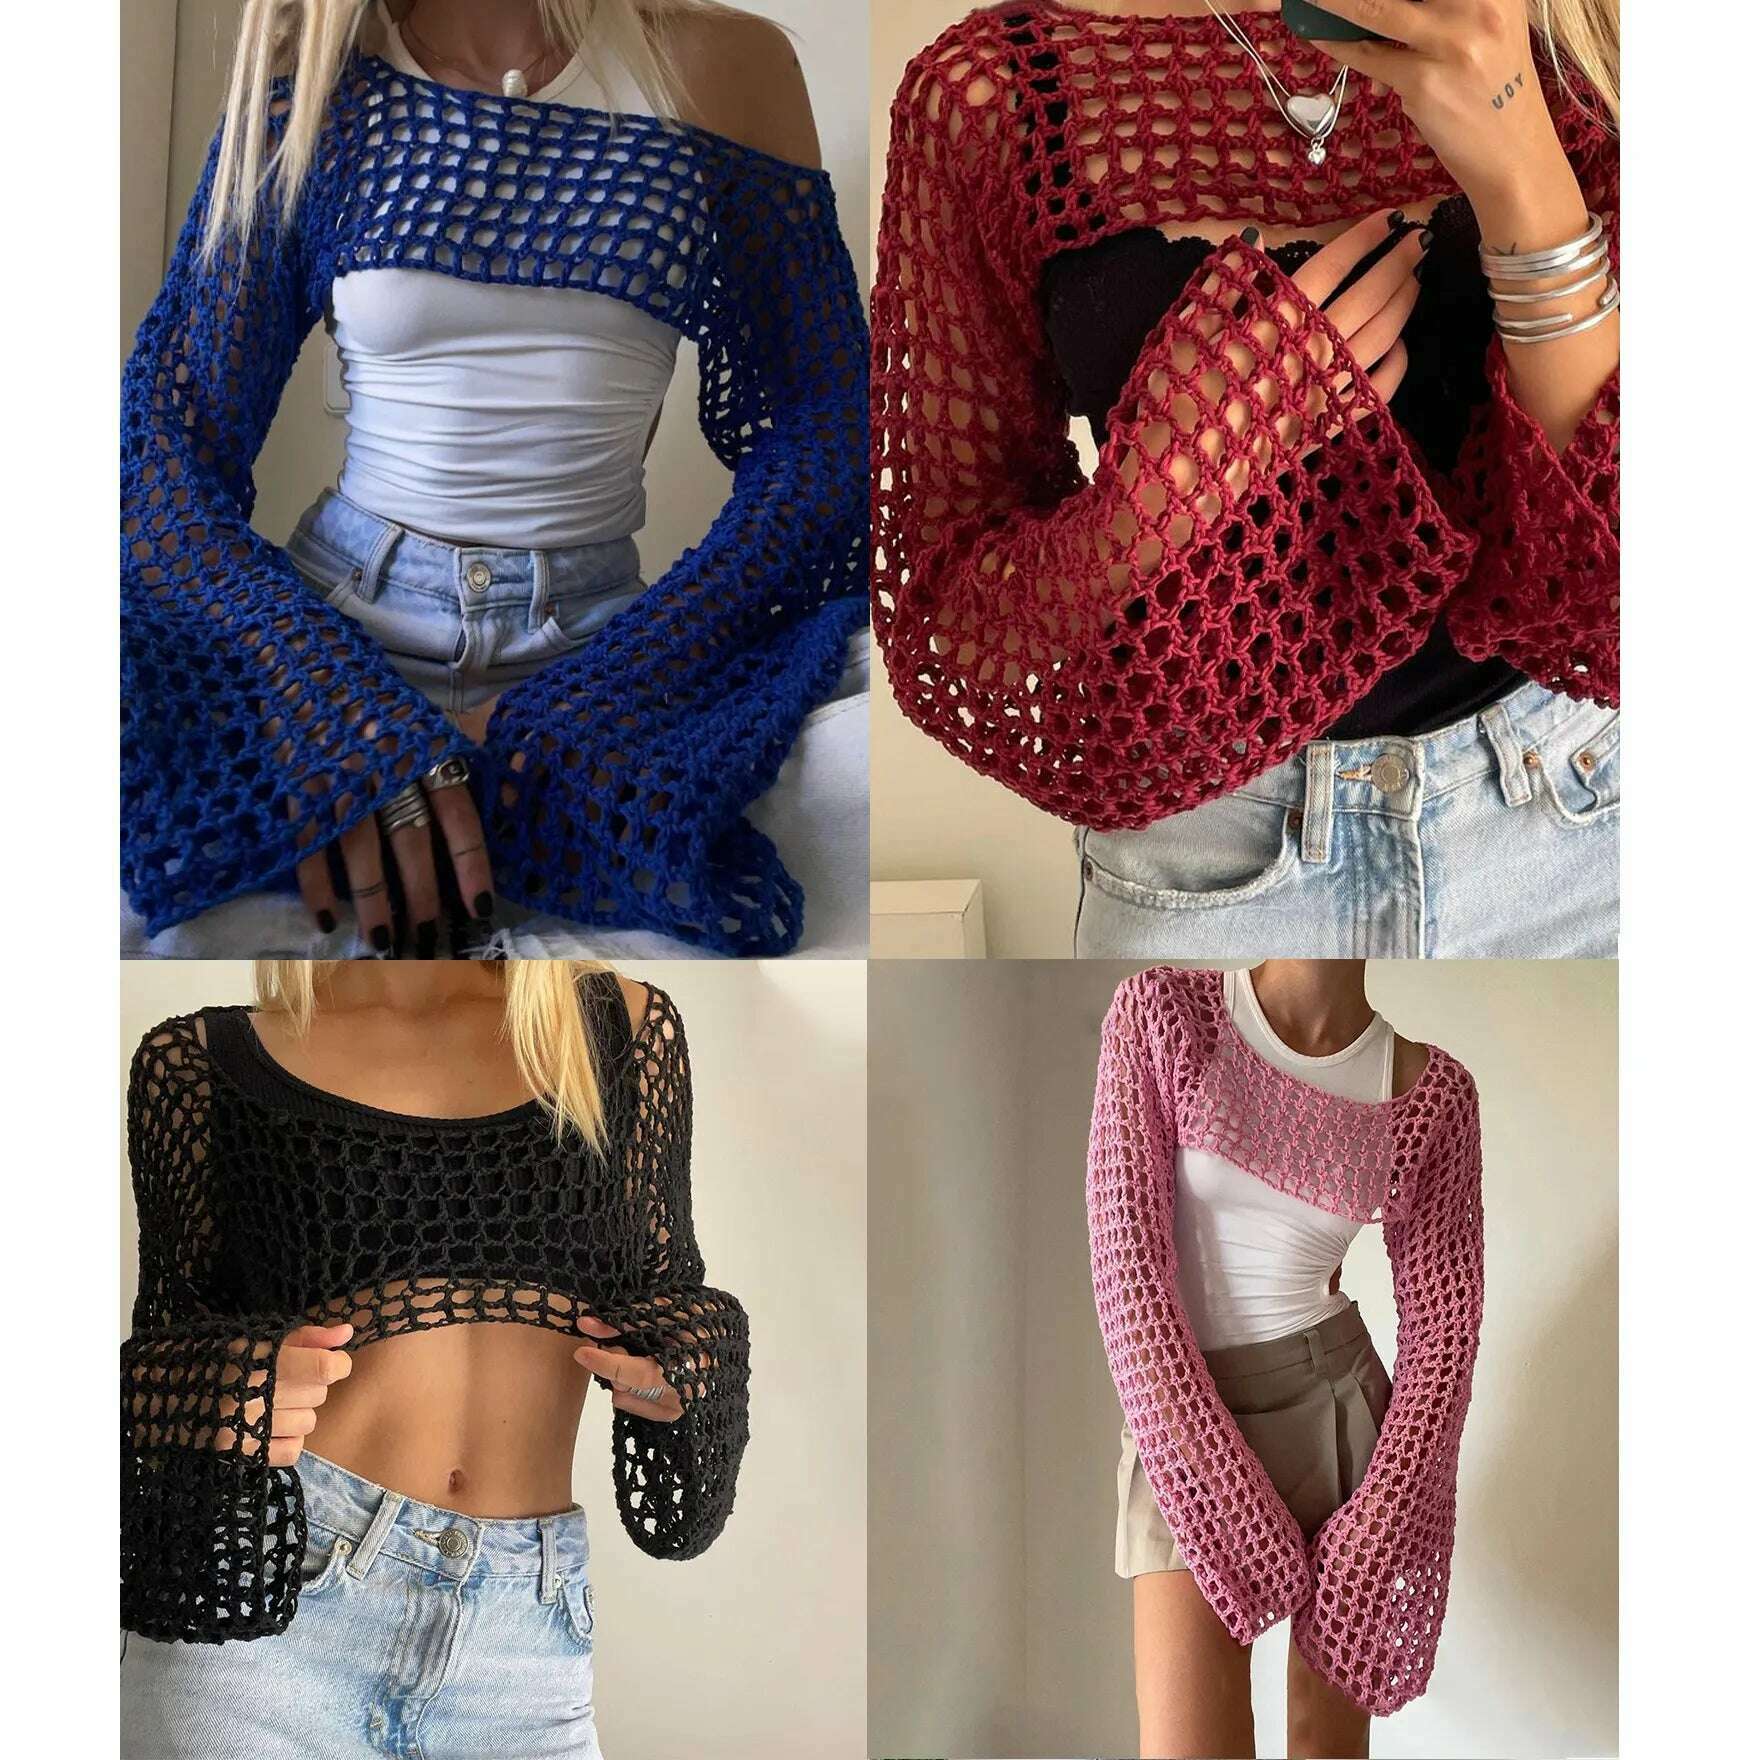 2023 Summer Y2k Crochet Knit Hollow Out Tops Vintage Mesh Top Grunge Clothes 2000s Aesthetic Mesh Sweatshirt Crop Top for Women, KIMLUD Women's Clothes